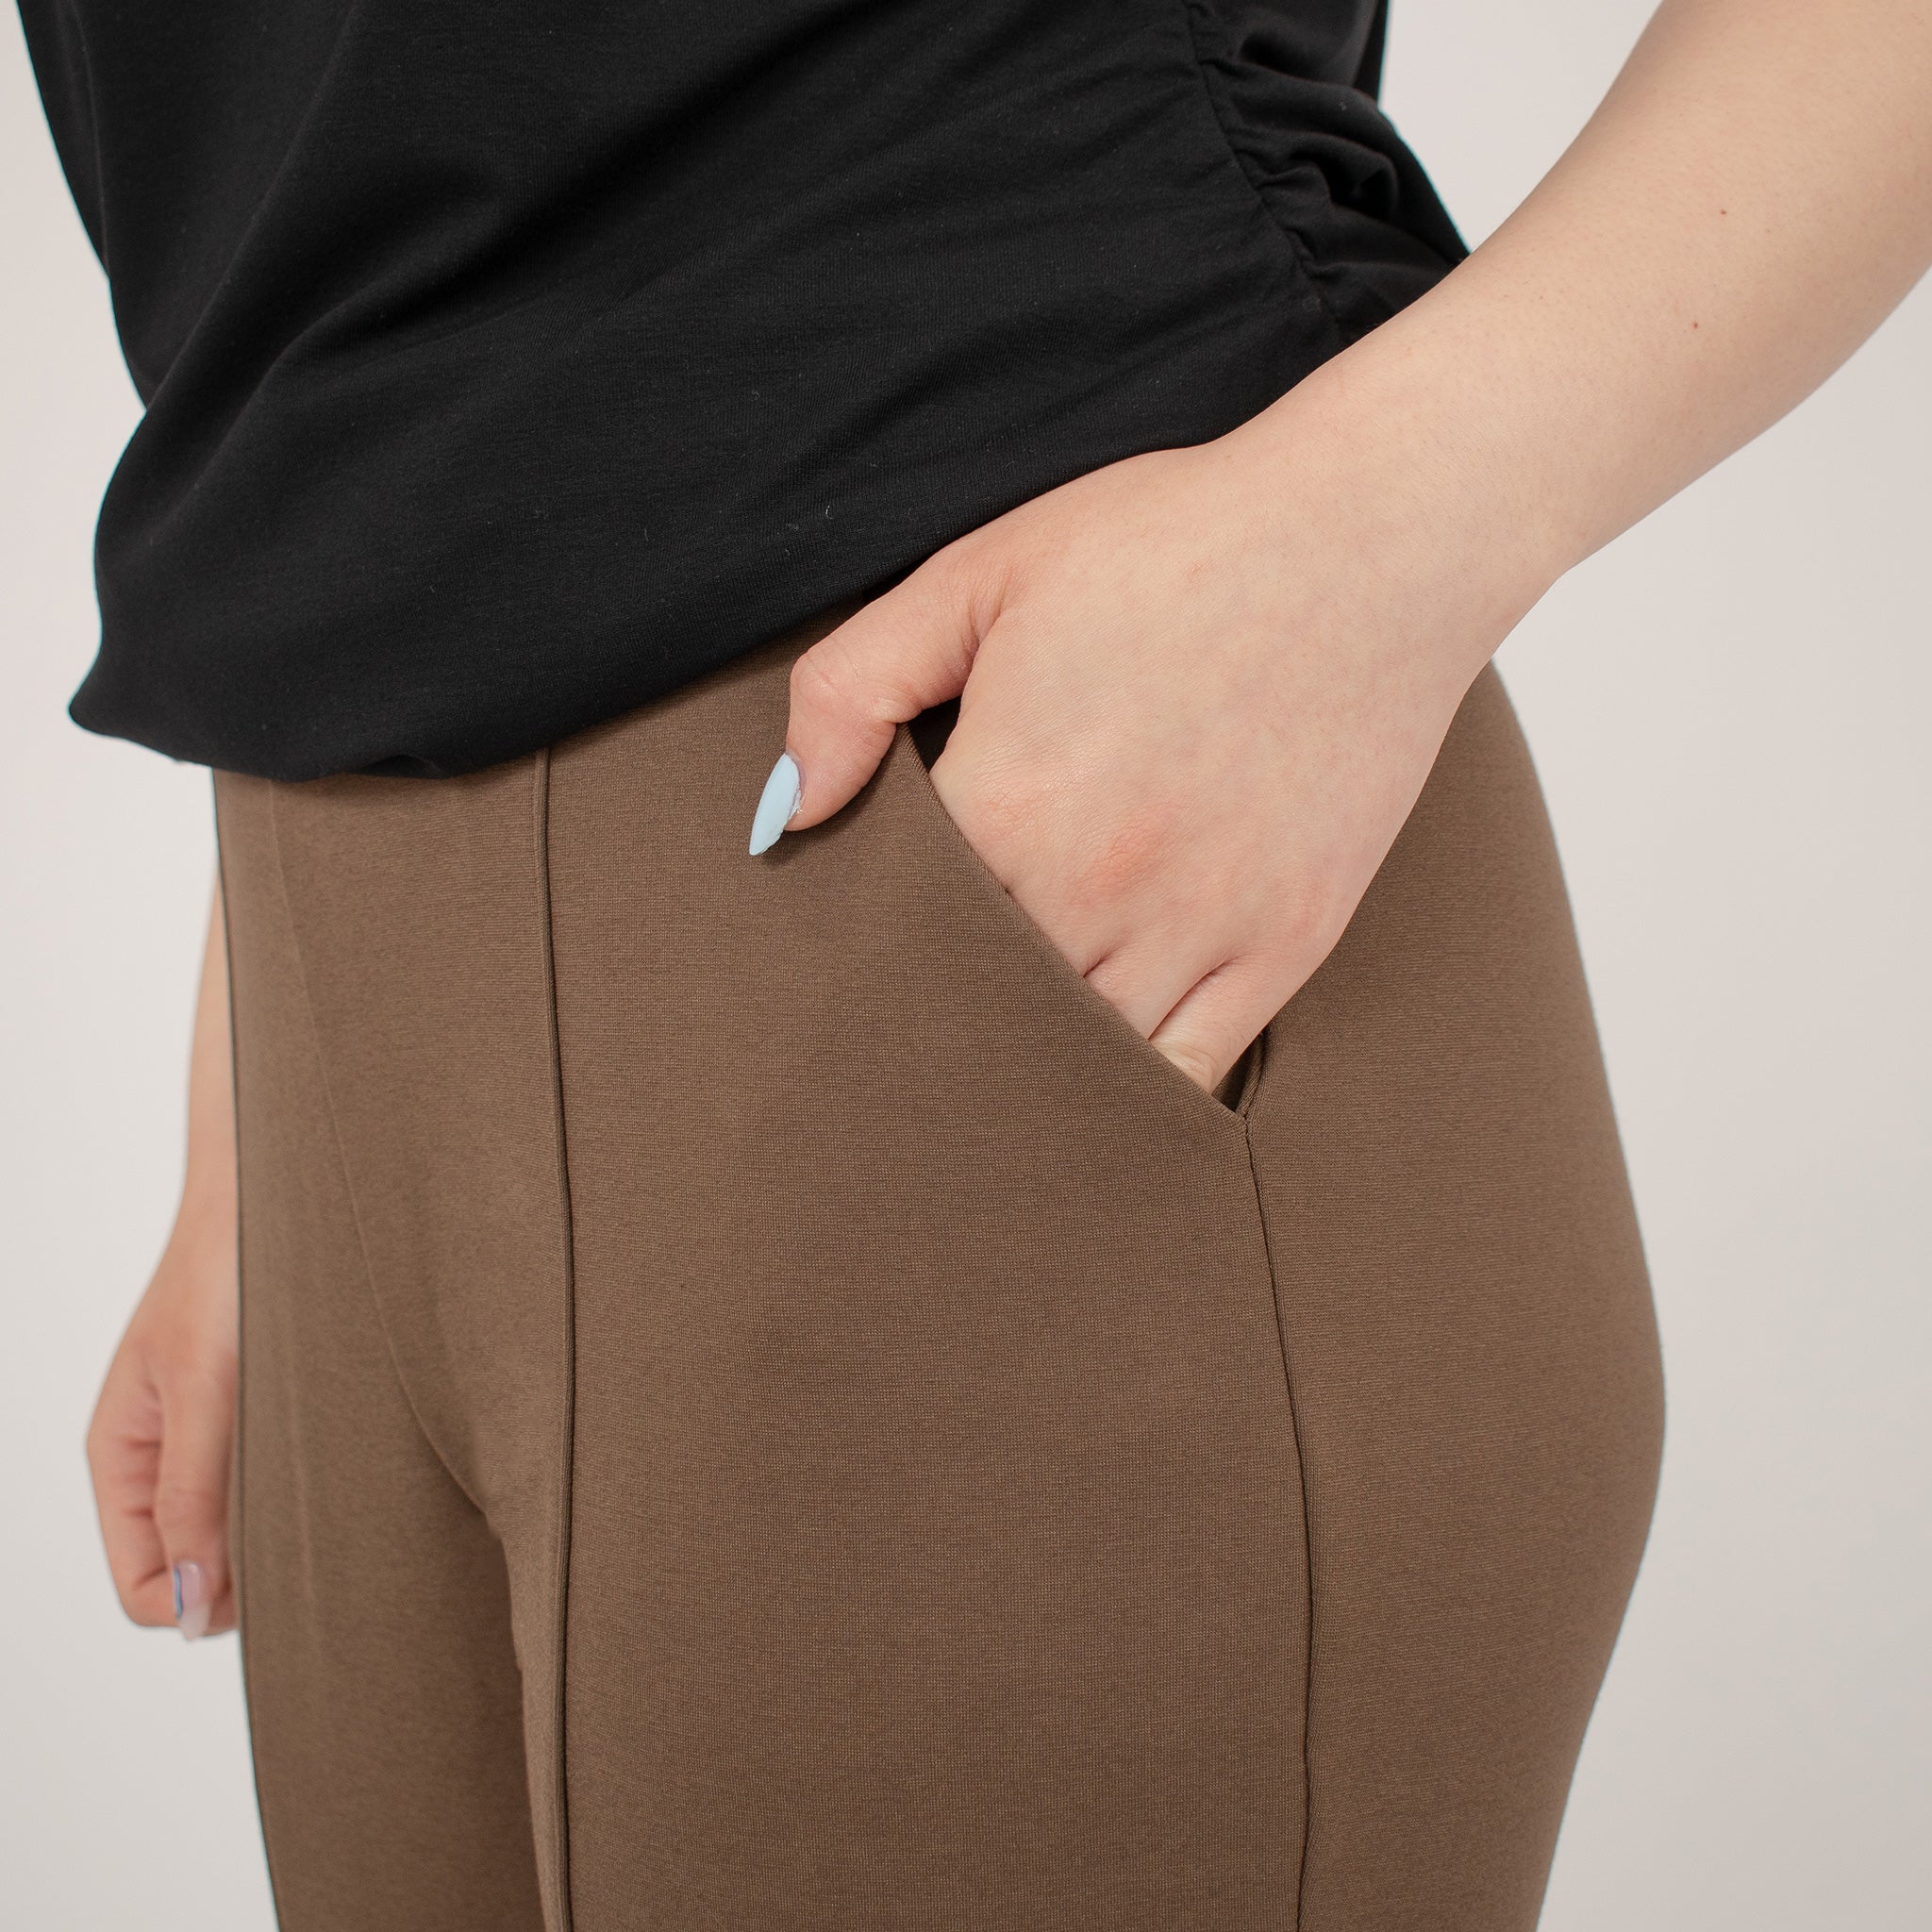 The Tailored Ponte Work Pant, Women's Sustainable Work Pant